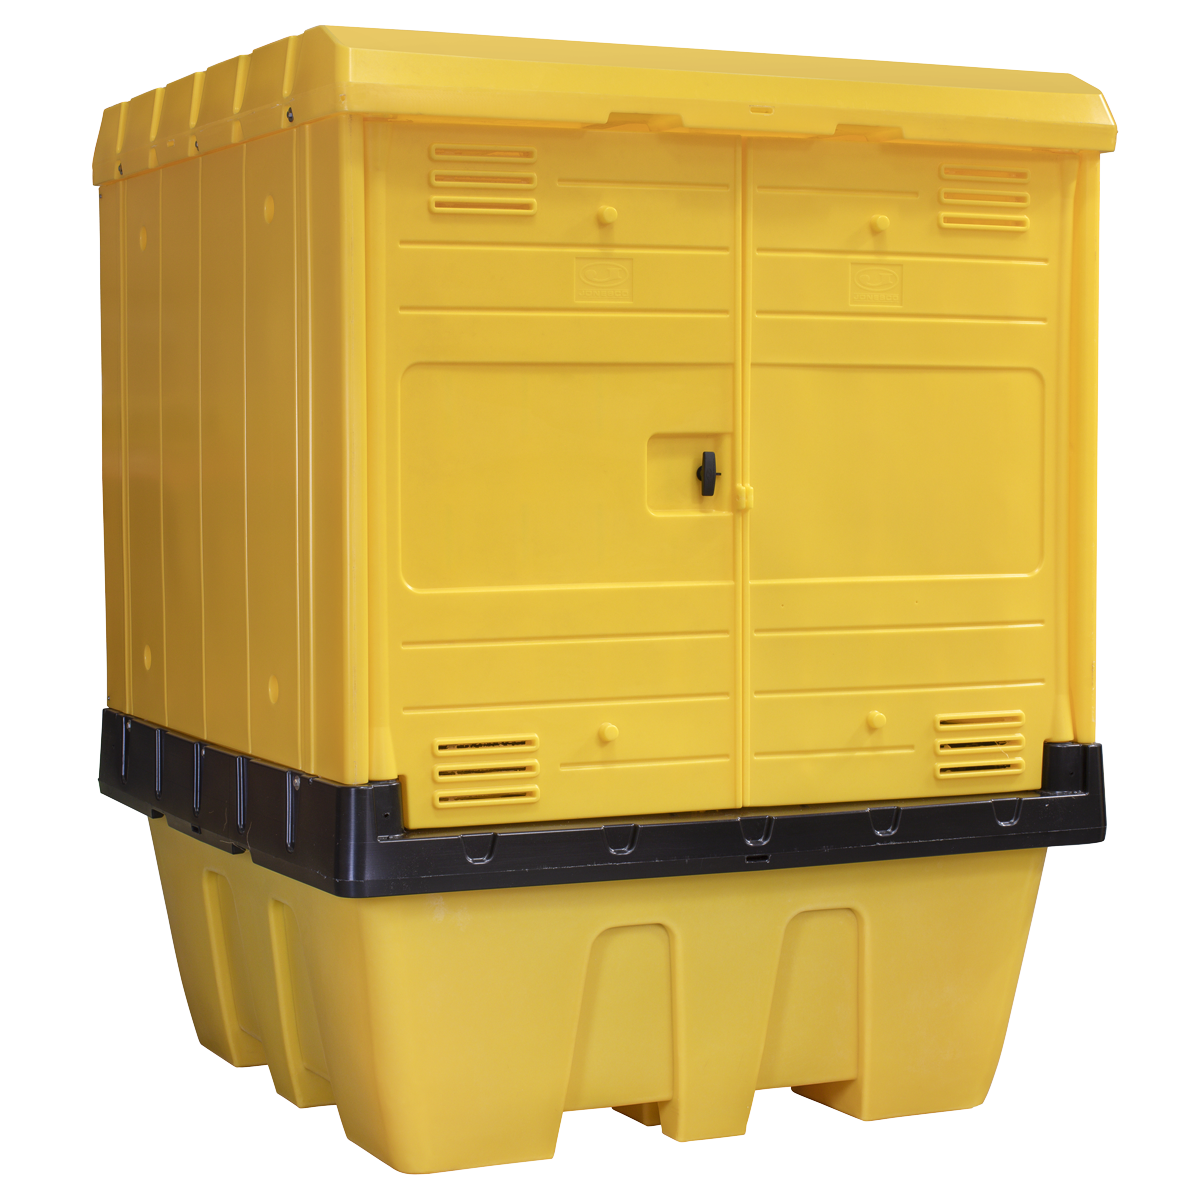 Sealey IBC Spill Pallet With Weathertight Hardcover SJ5101